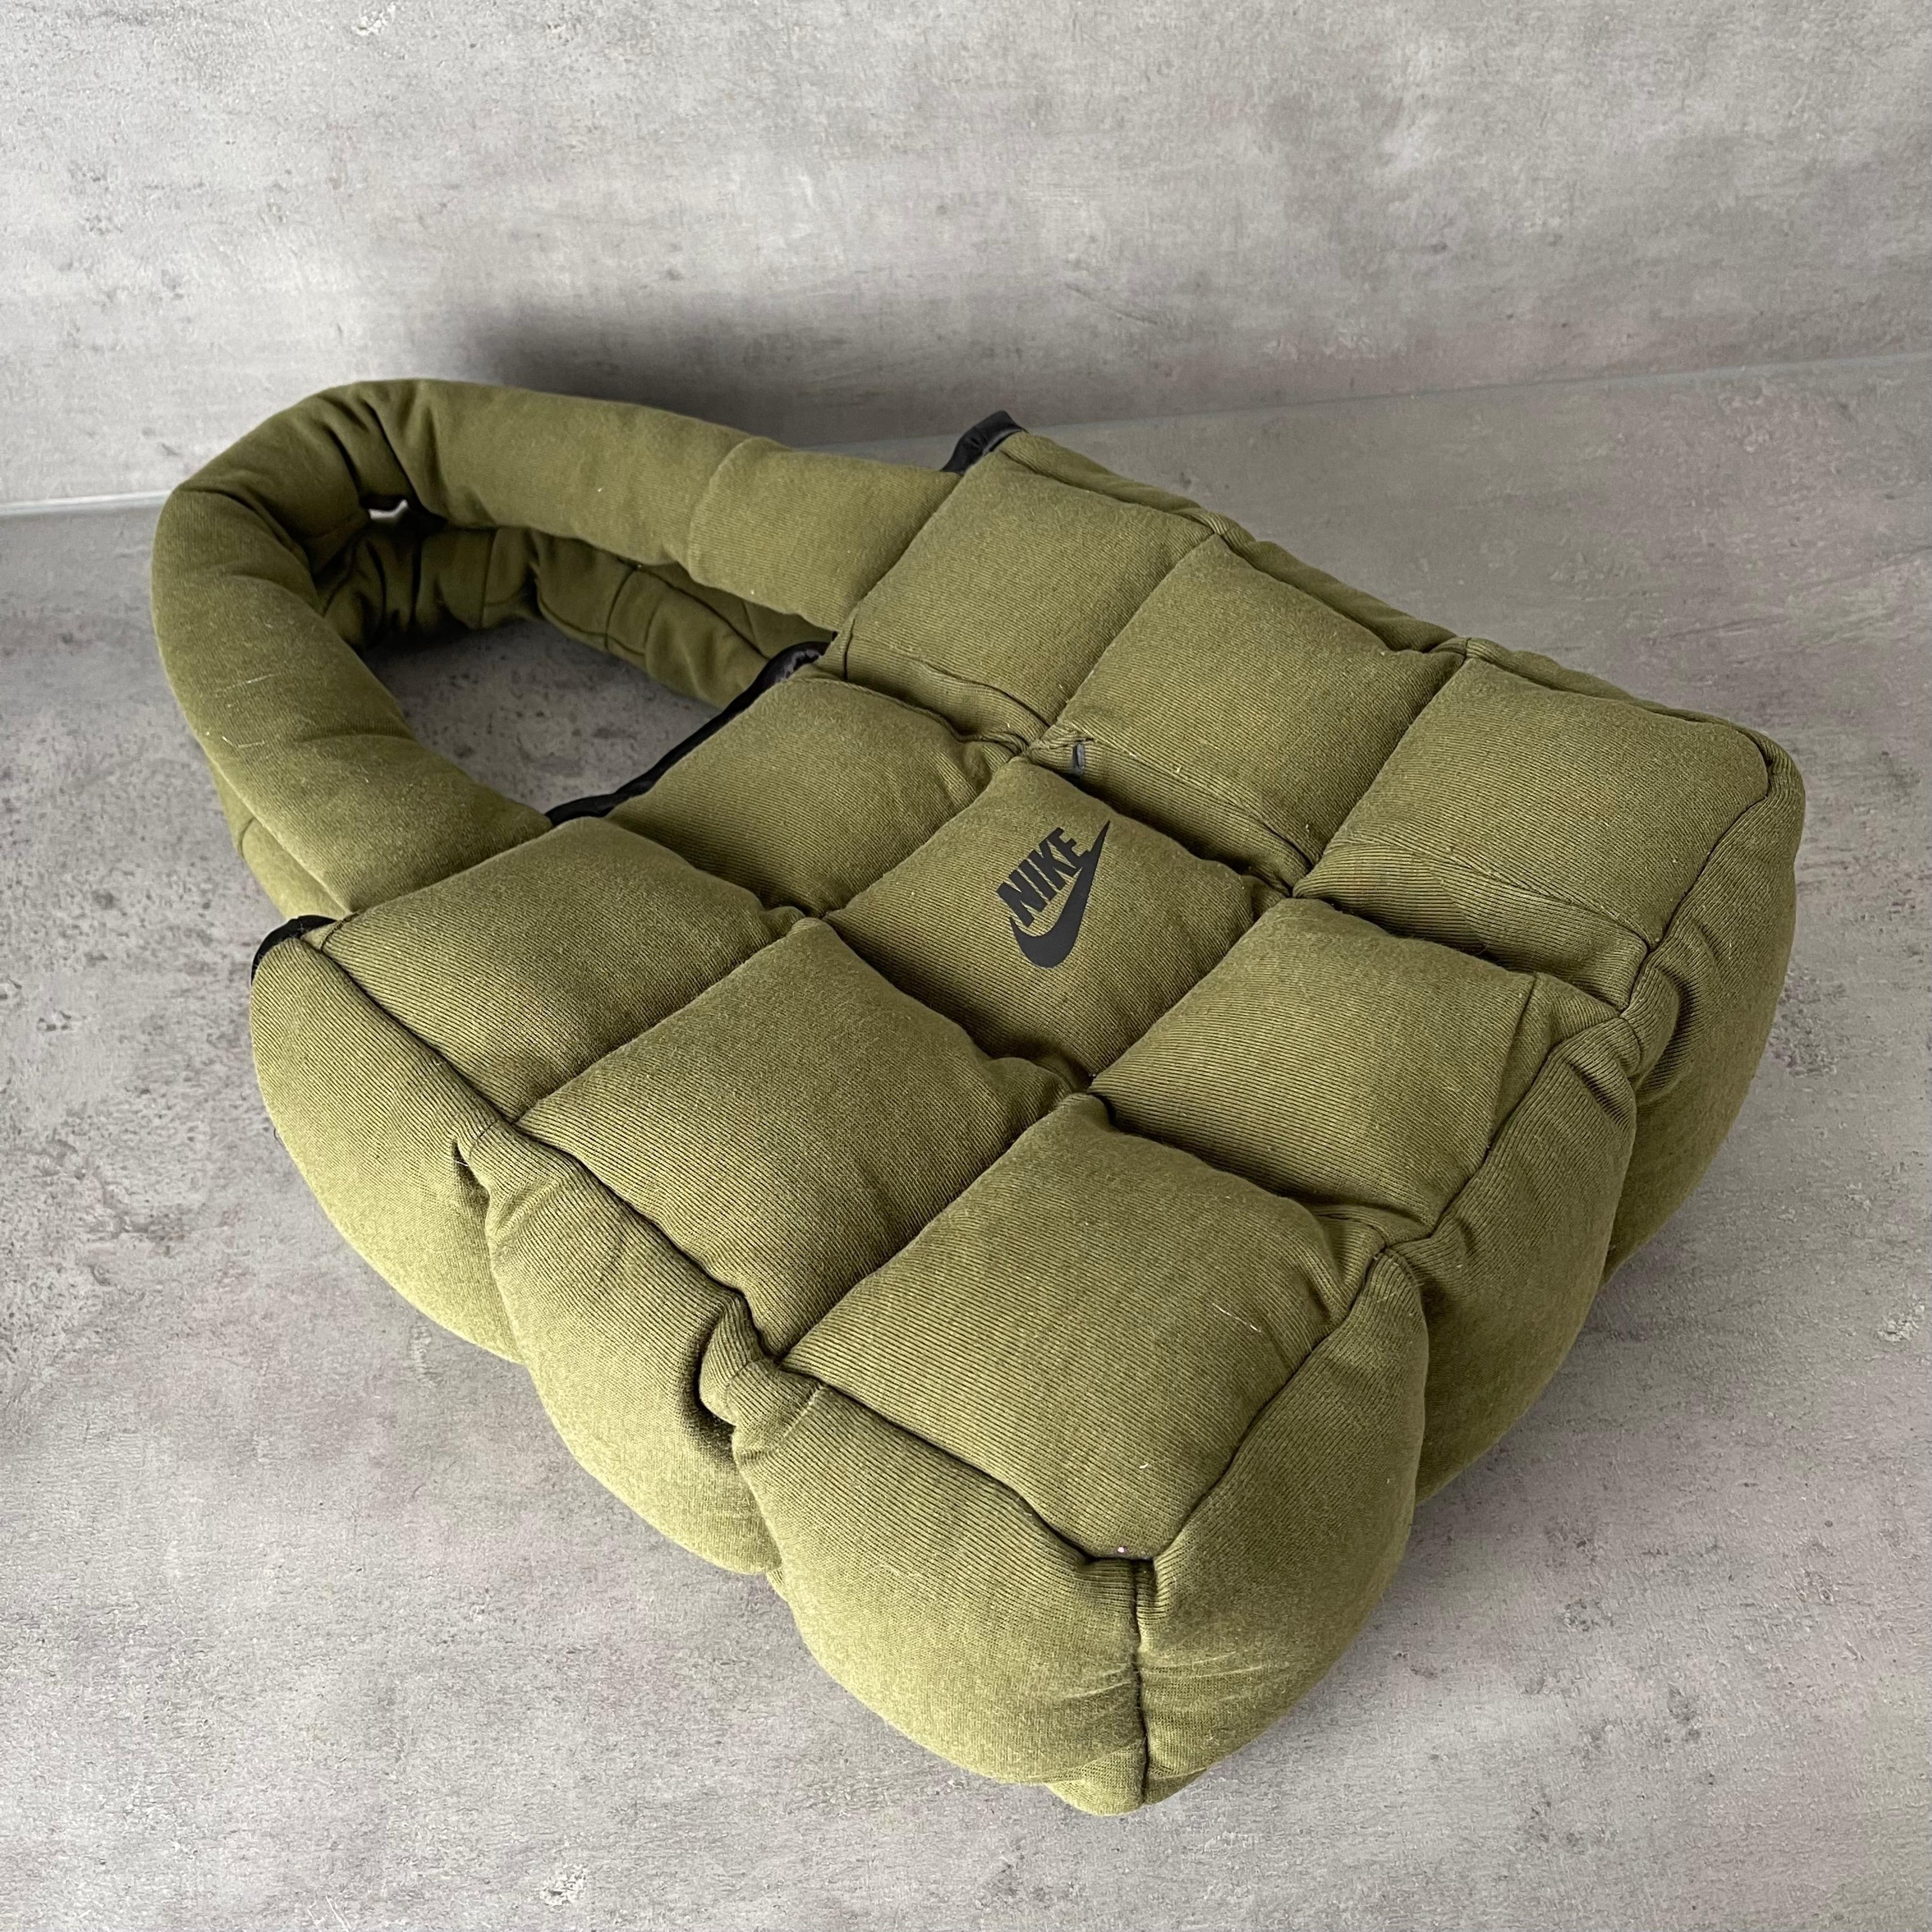 Alternate View 1 of Everyday Army Green Puffer Bag